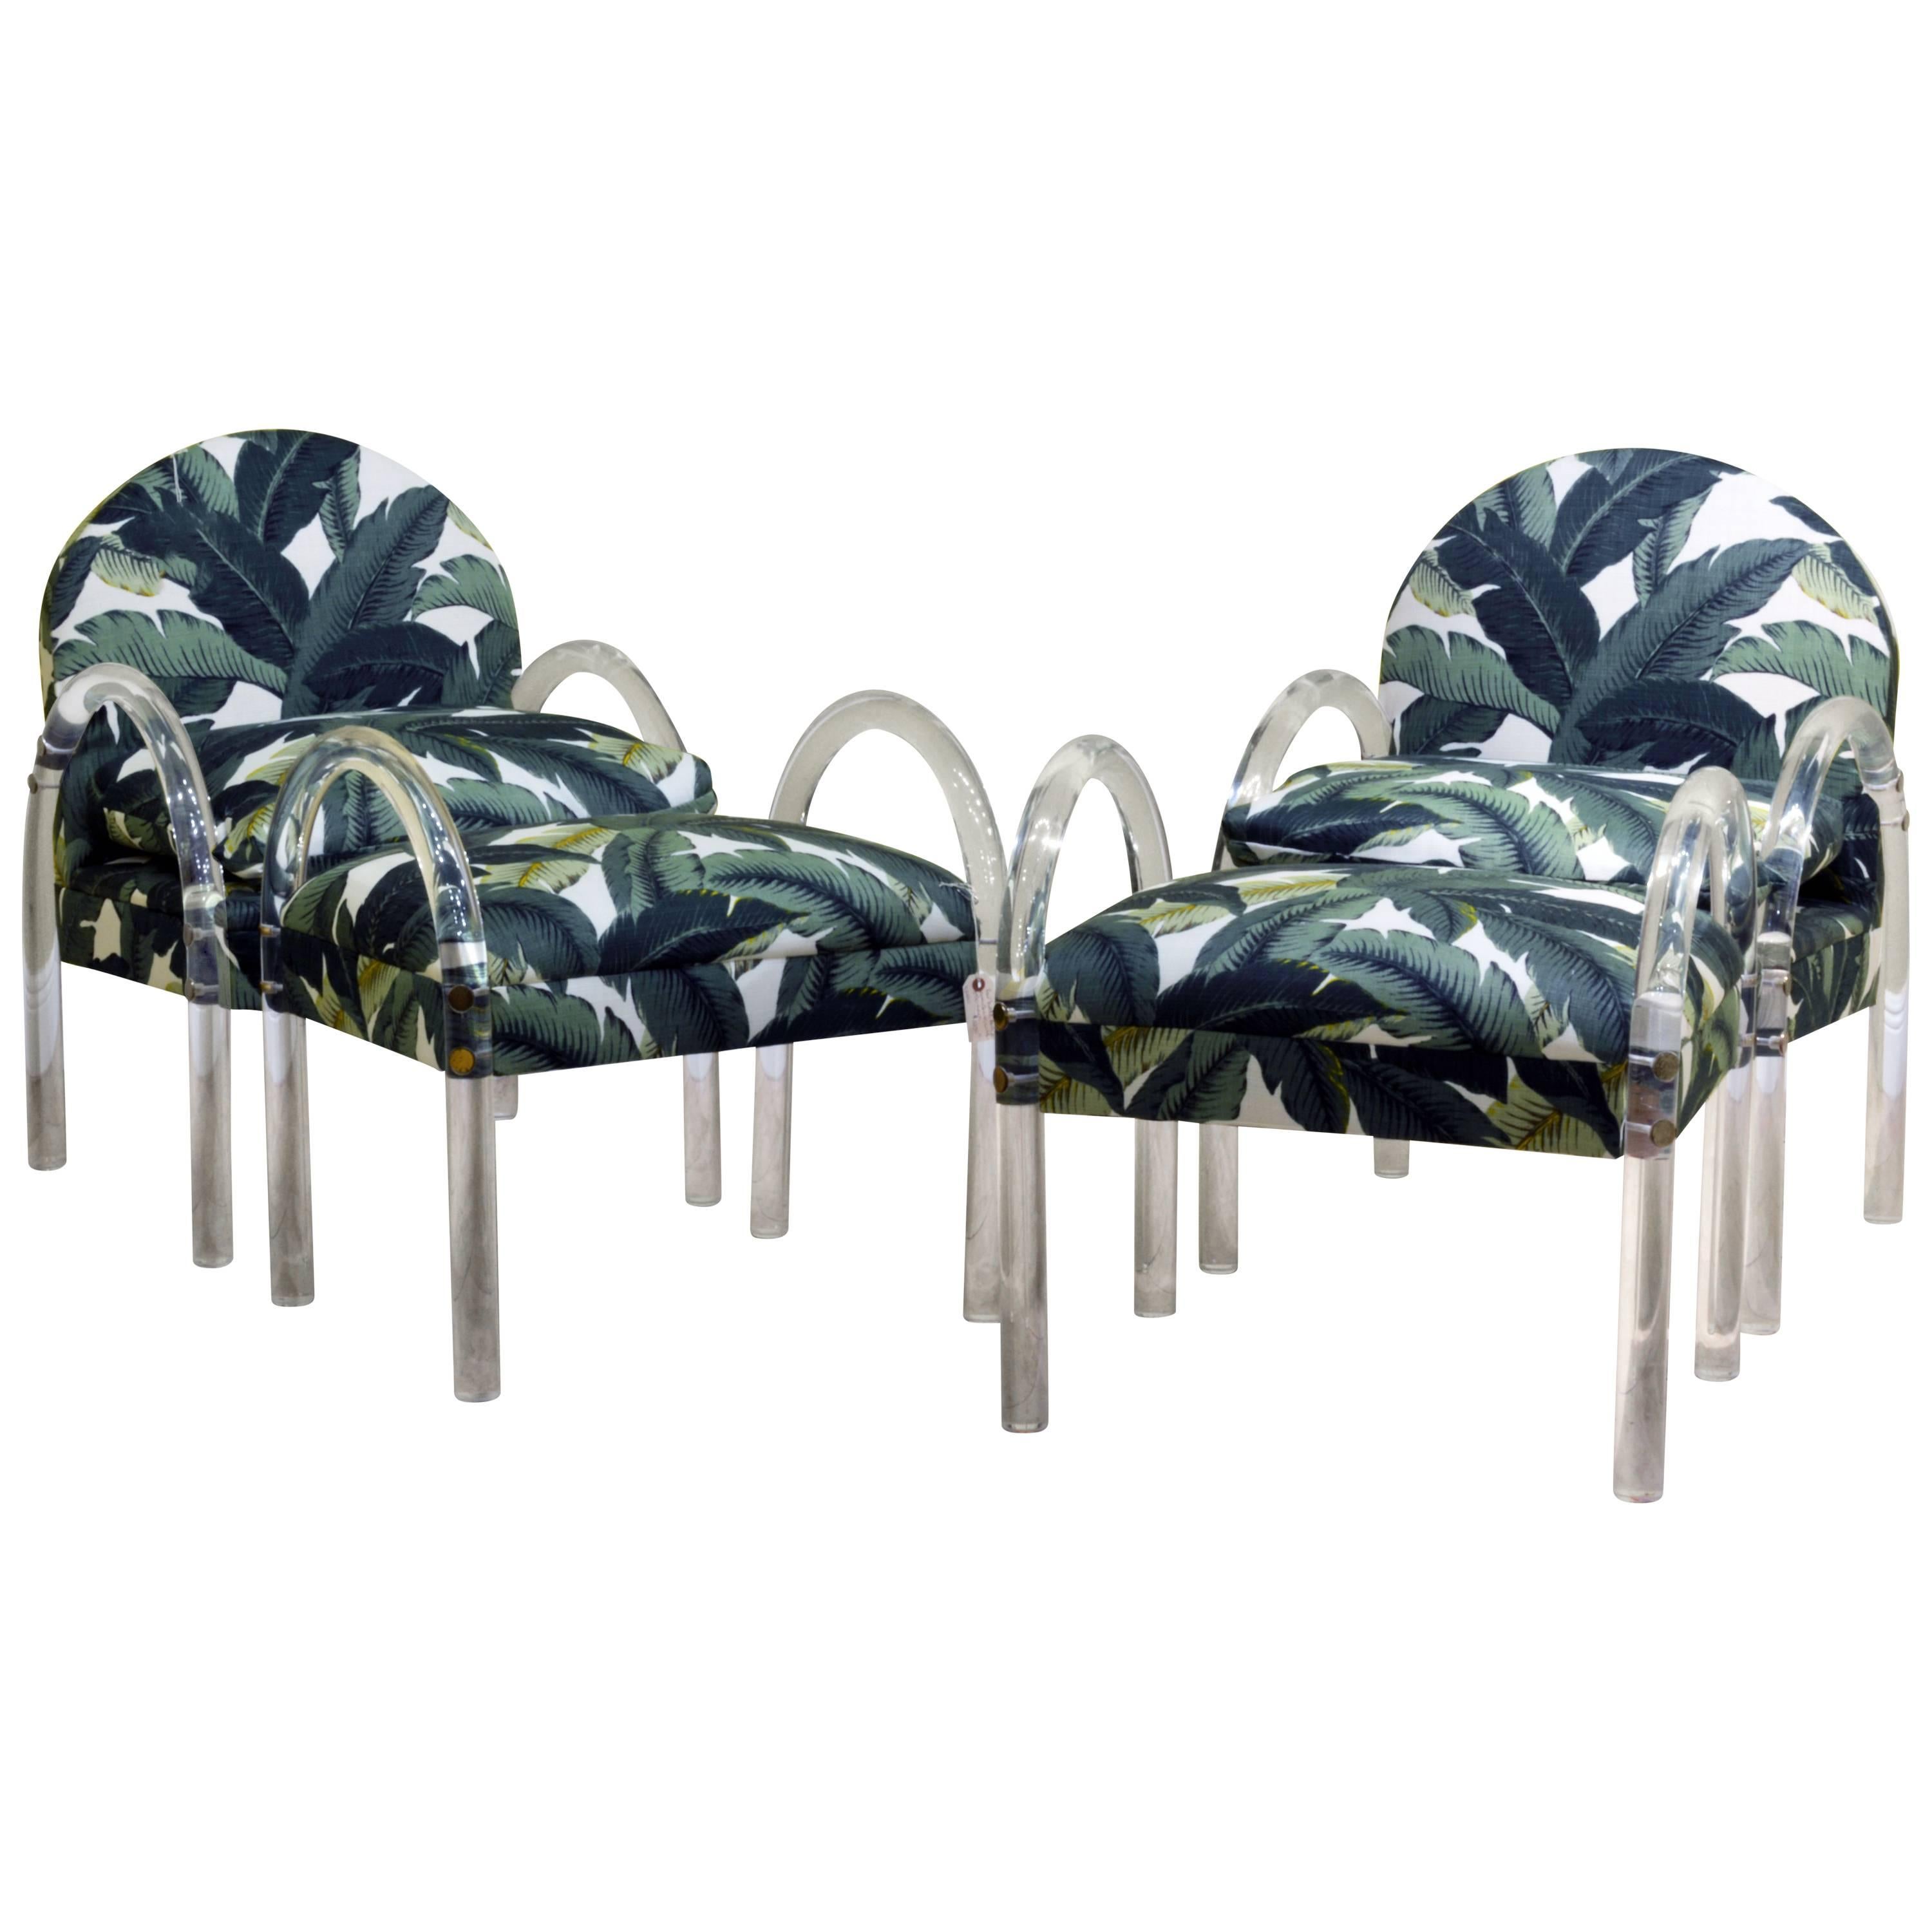 Pair of Lucite Lounge Chairs/Ottomans, Charles Hollis Jones for Pace Collection